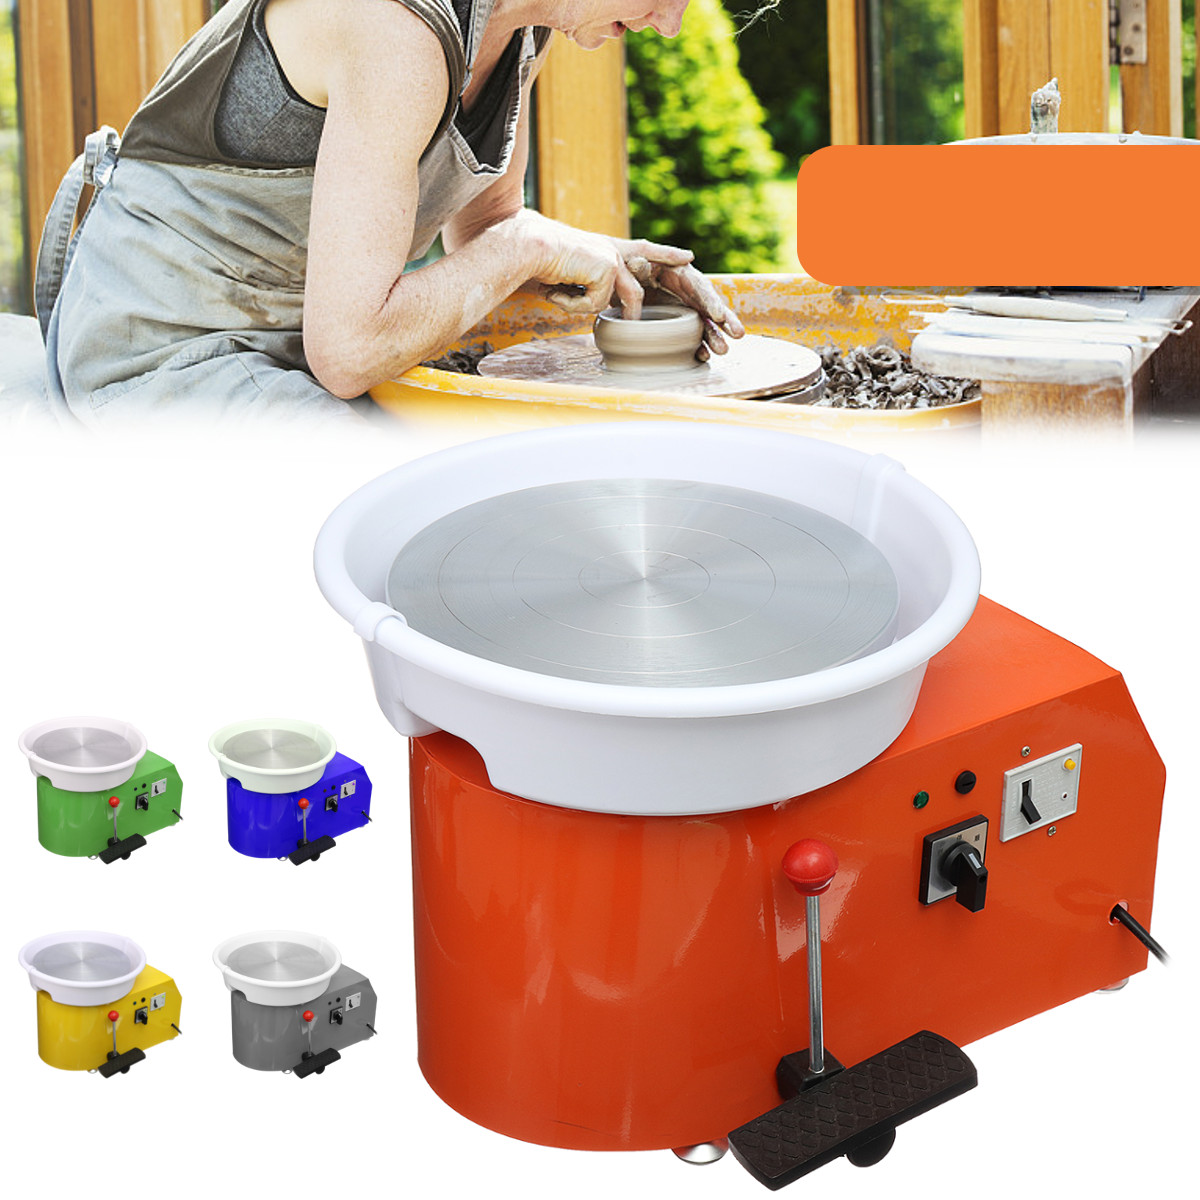 

250W 110V Electric Pottery Wheel Removable Machine Ceramic Work Clay Art Craft